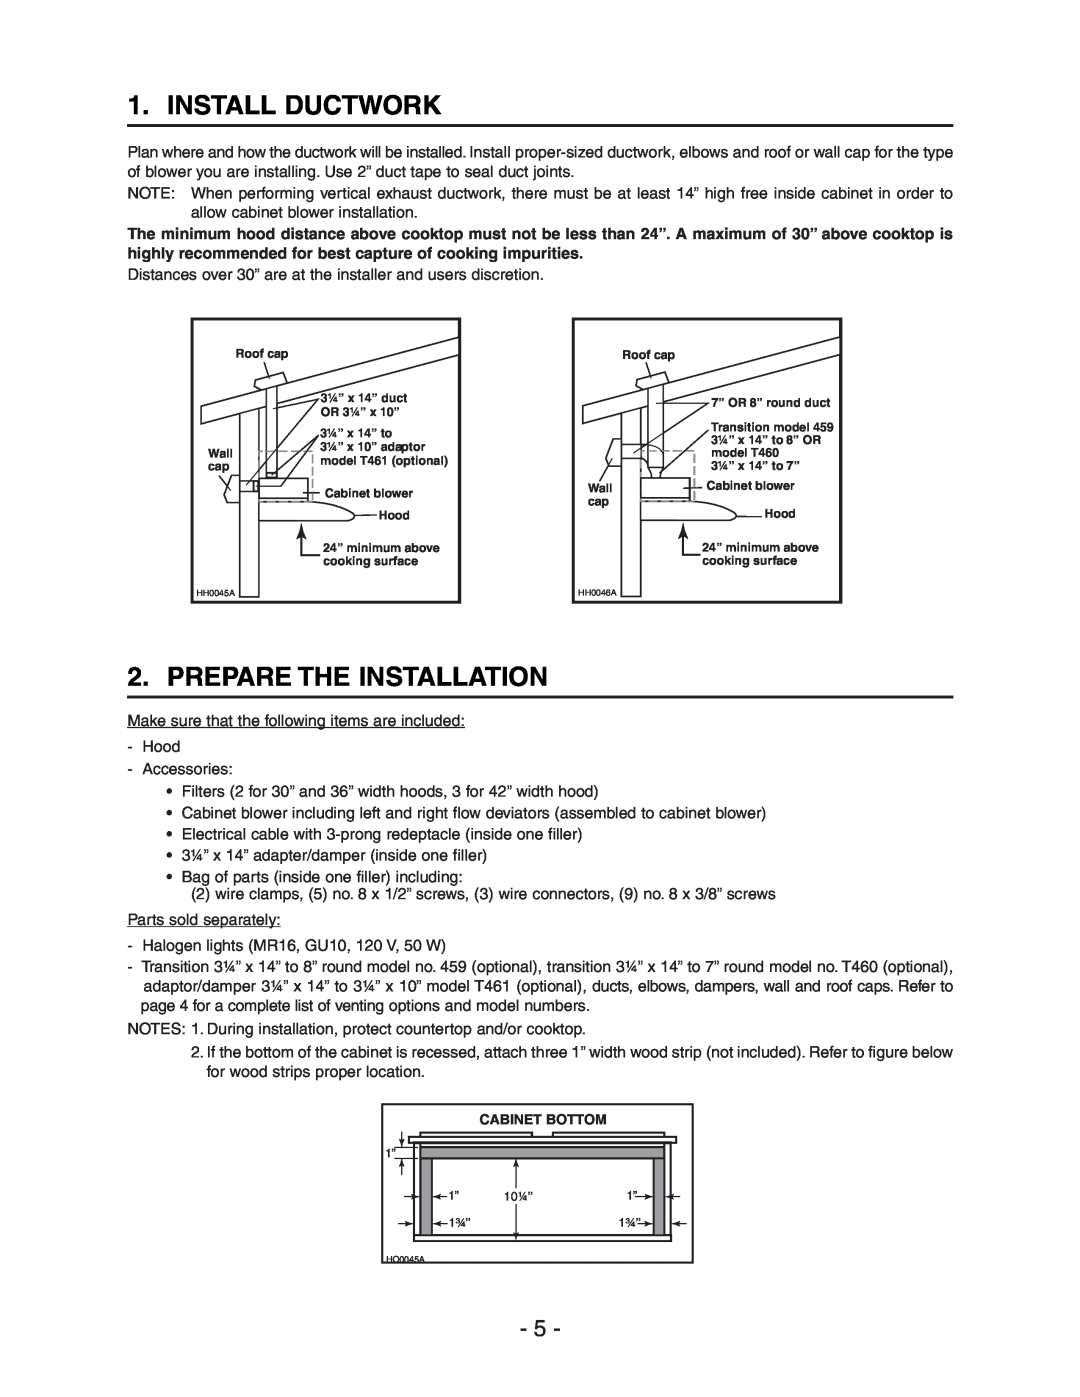 Broan E662 installation instructions Install Ductwork, Prepare The Installation 